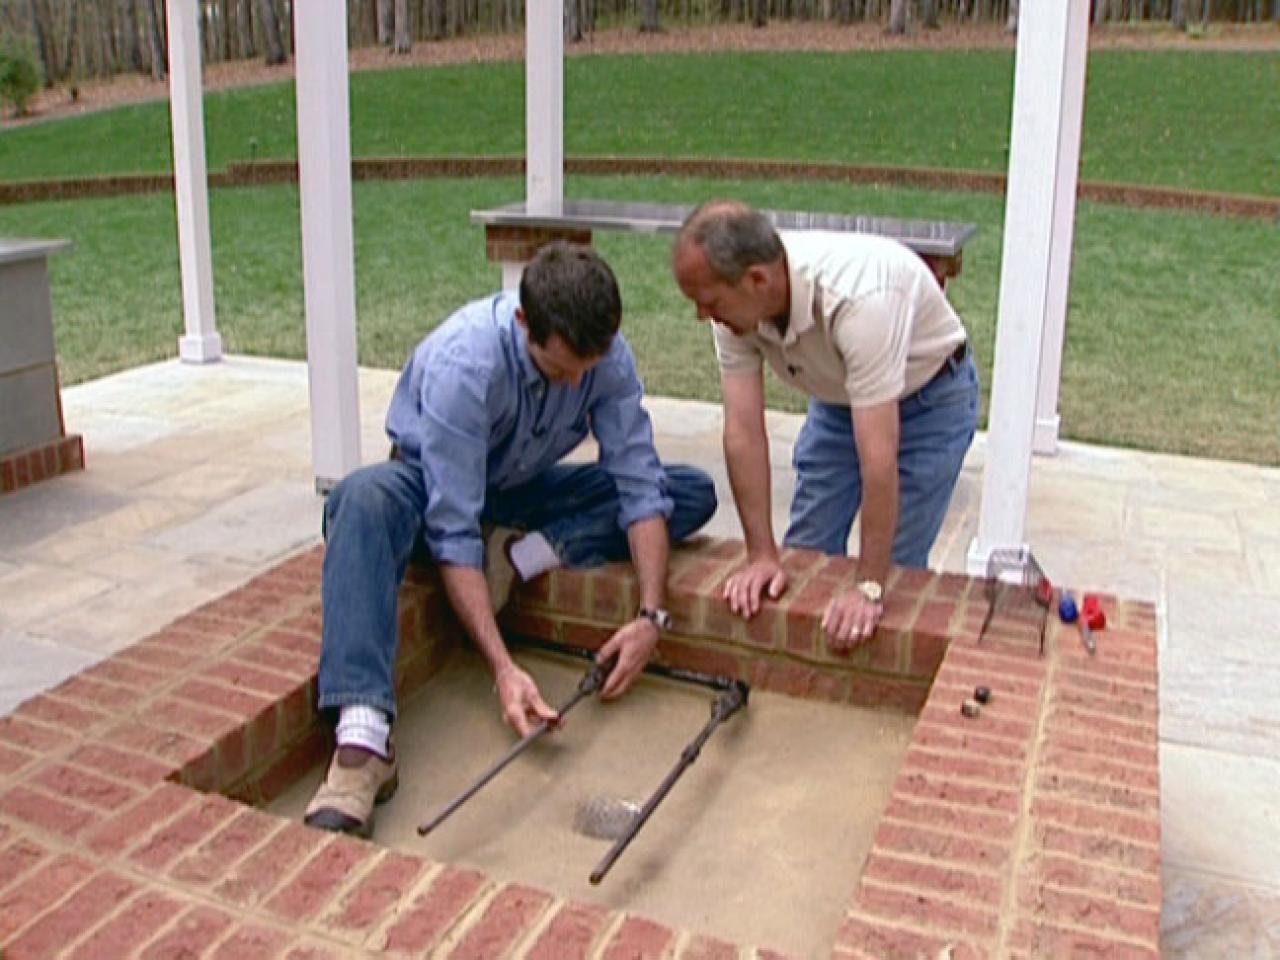 How To Hook Up The Gas For A Fire Pit, How To Install Gas Fire Pit On Deck